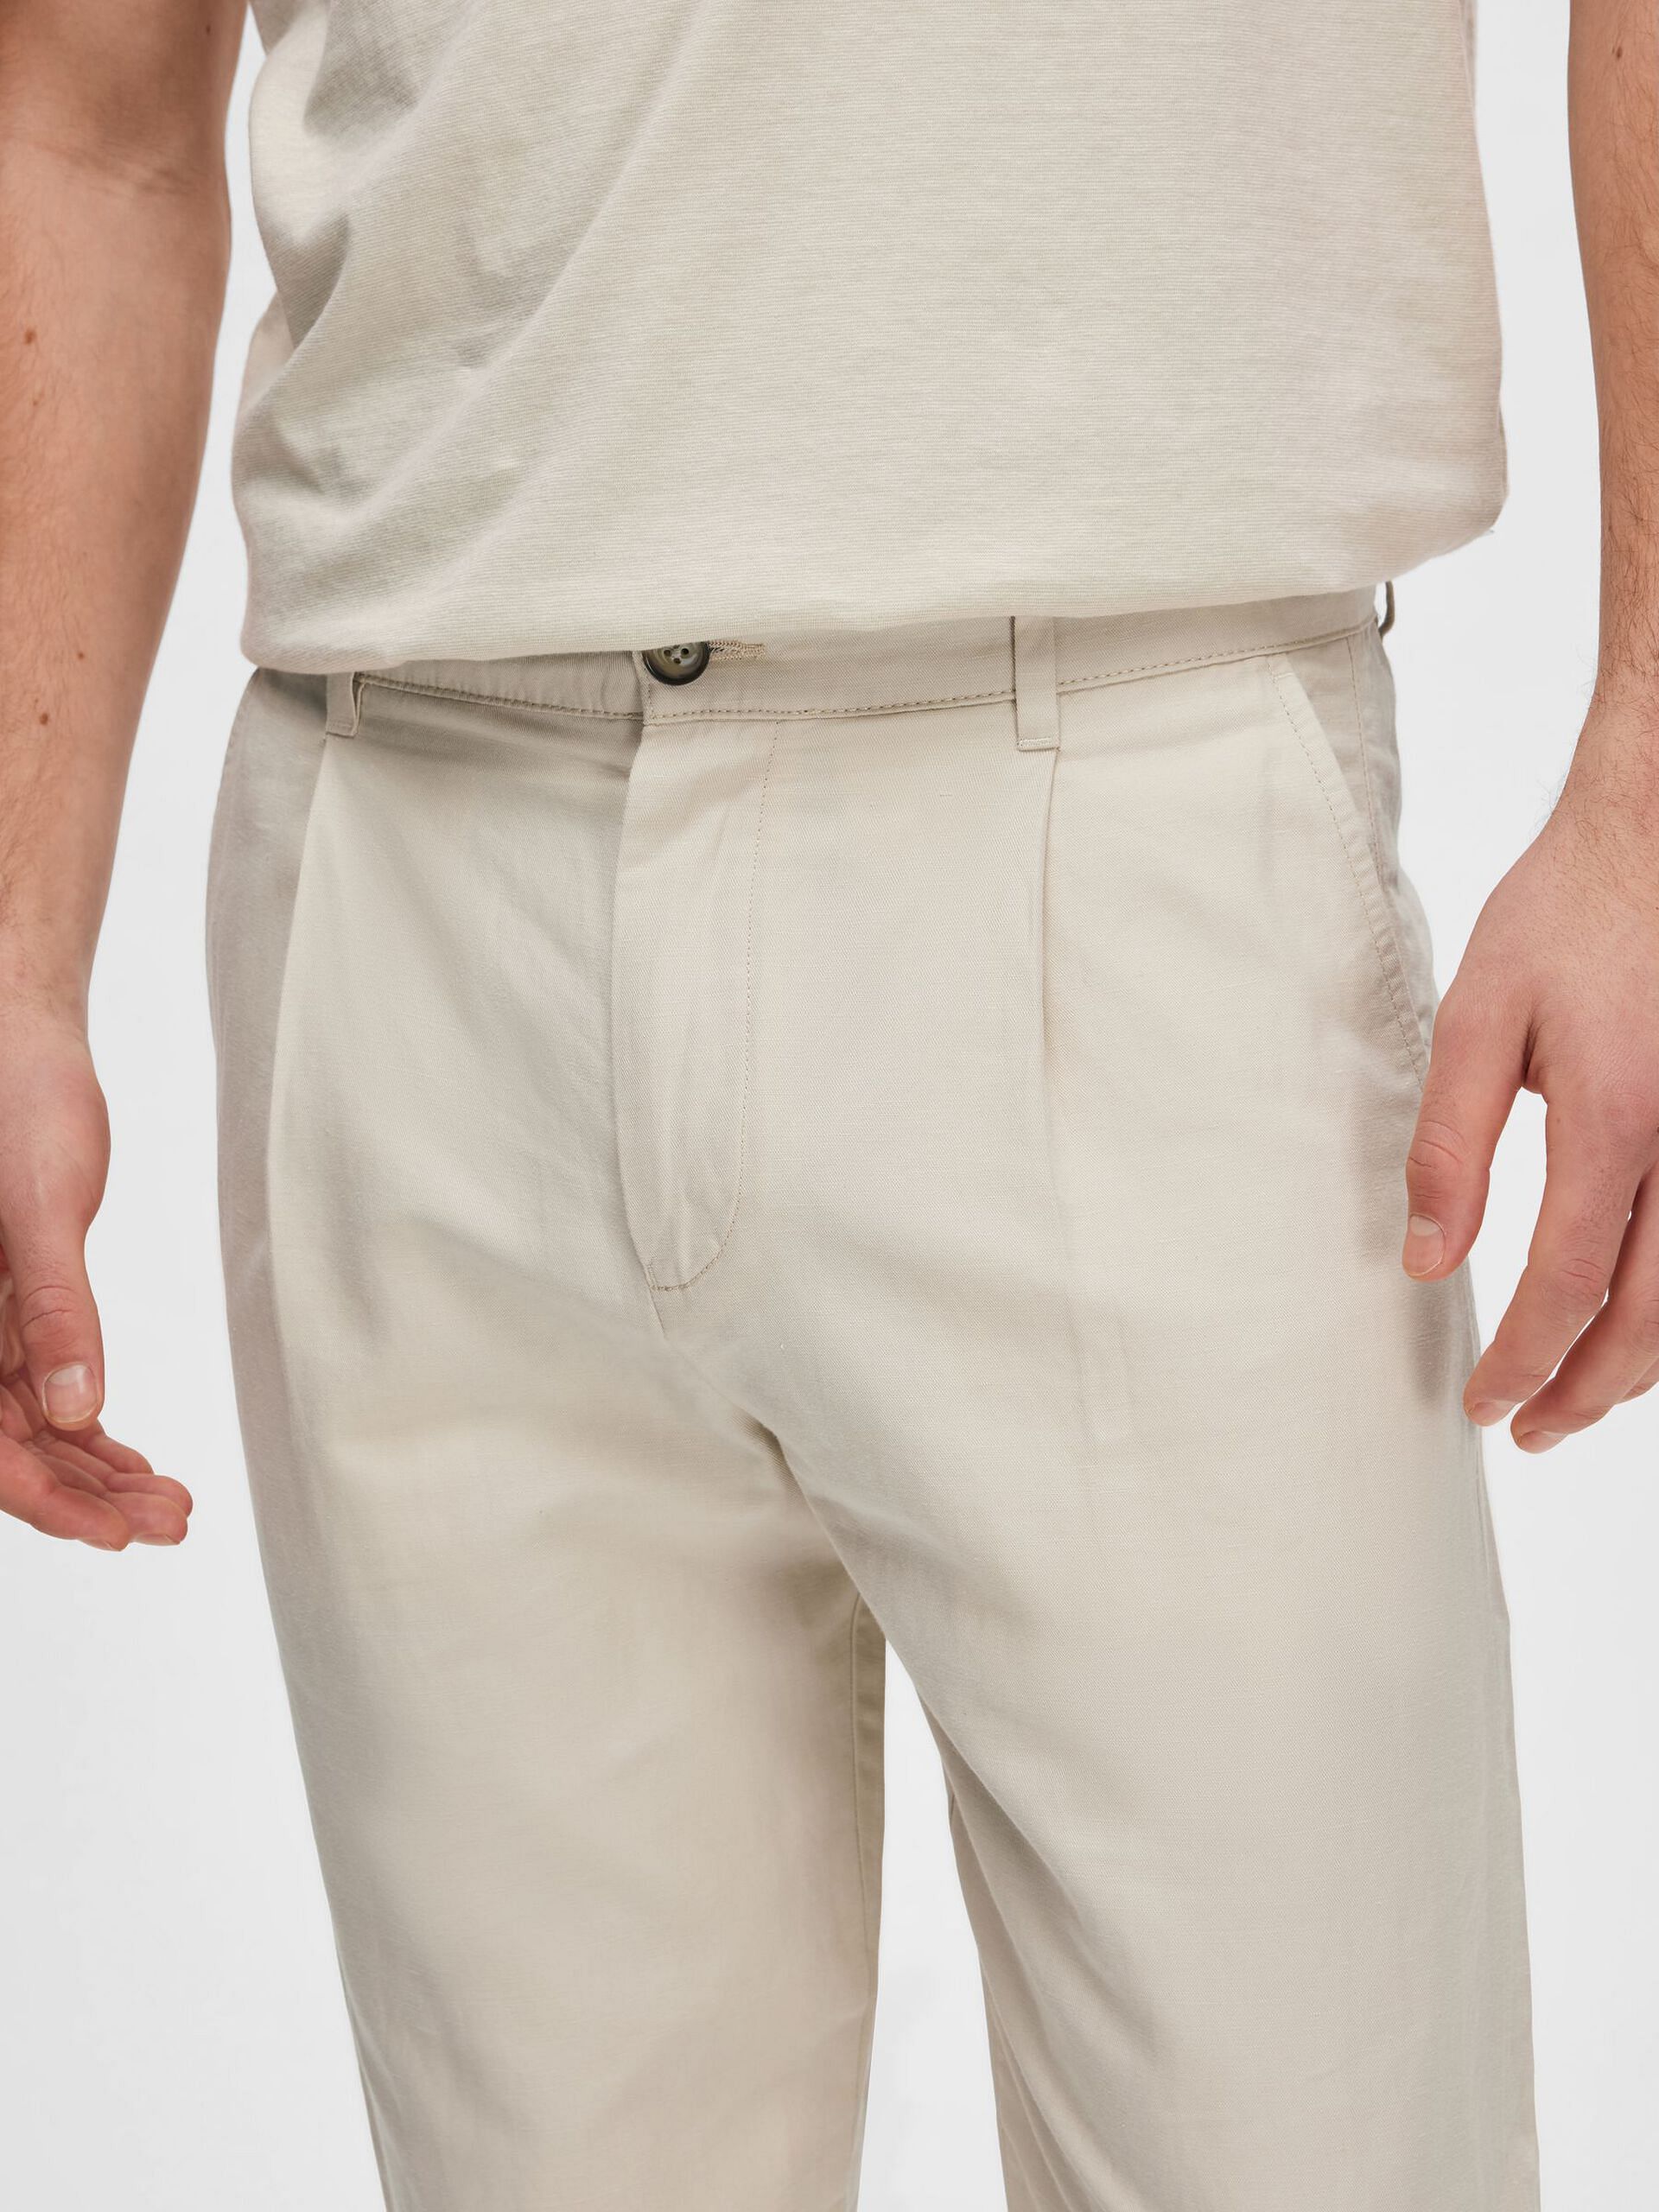 Buy Men Readymade Cotton & Linen Trousers Online in India @ Tailorman